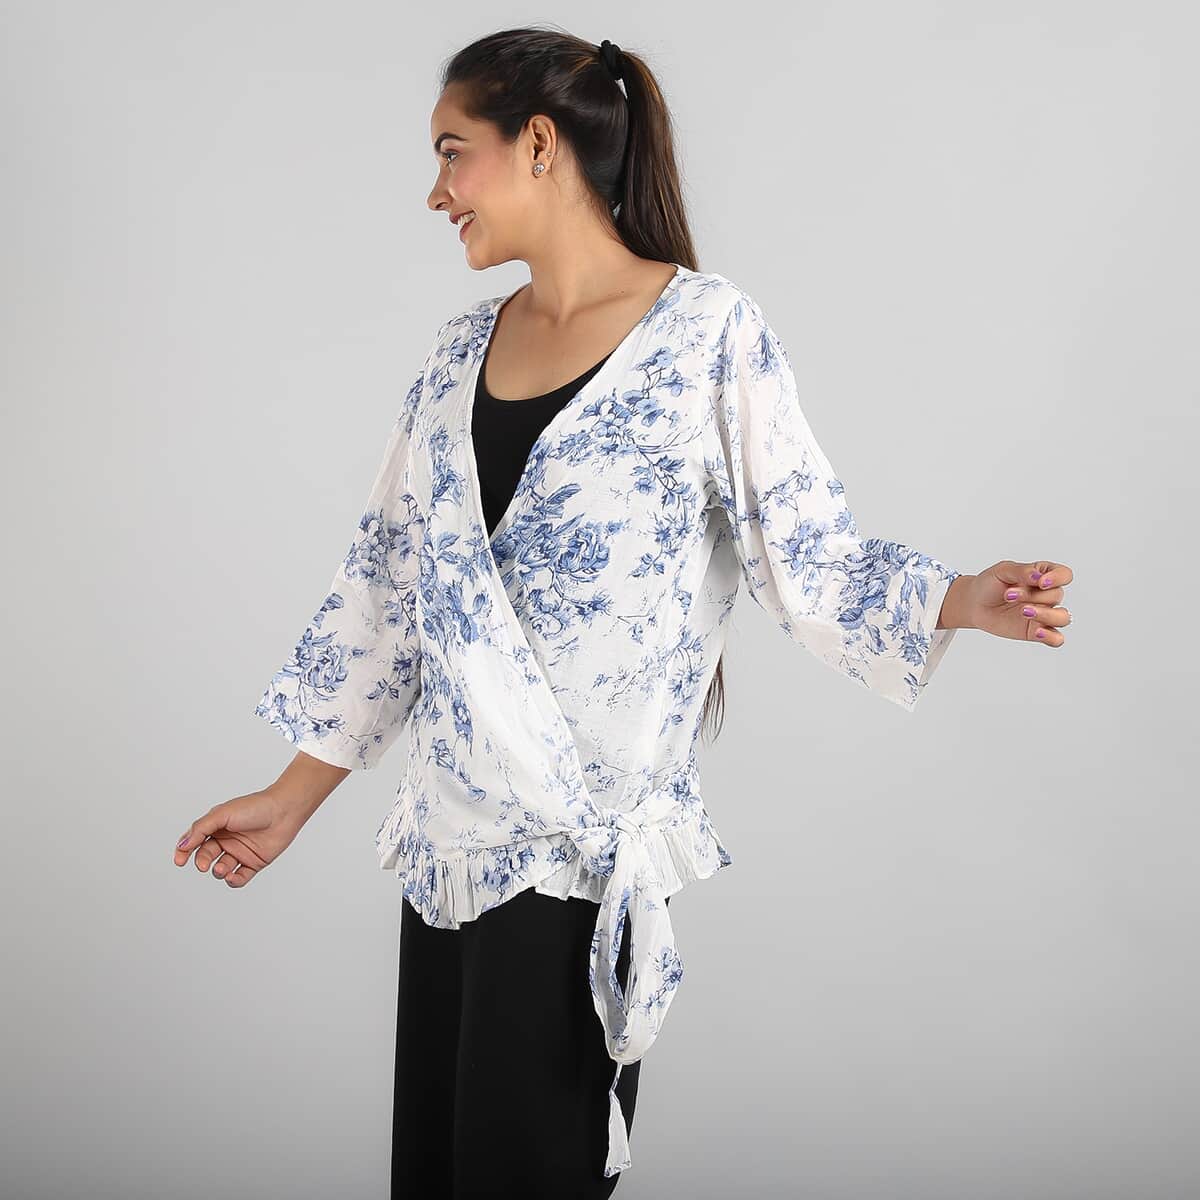 JOVIE Blue Floral Cotton Gauze Wrap Blouse with Frill Trim - One Size Missy (26.25"x23.5") image number 2